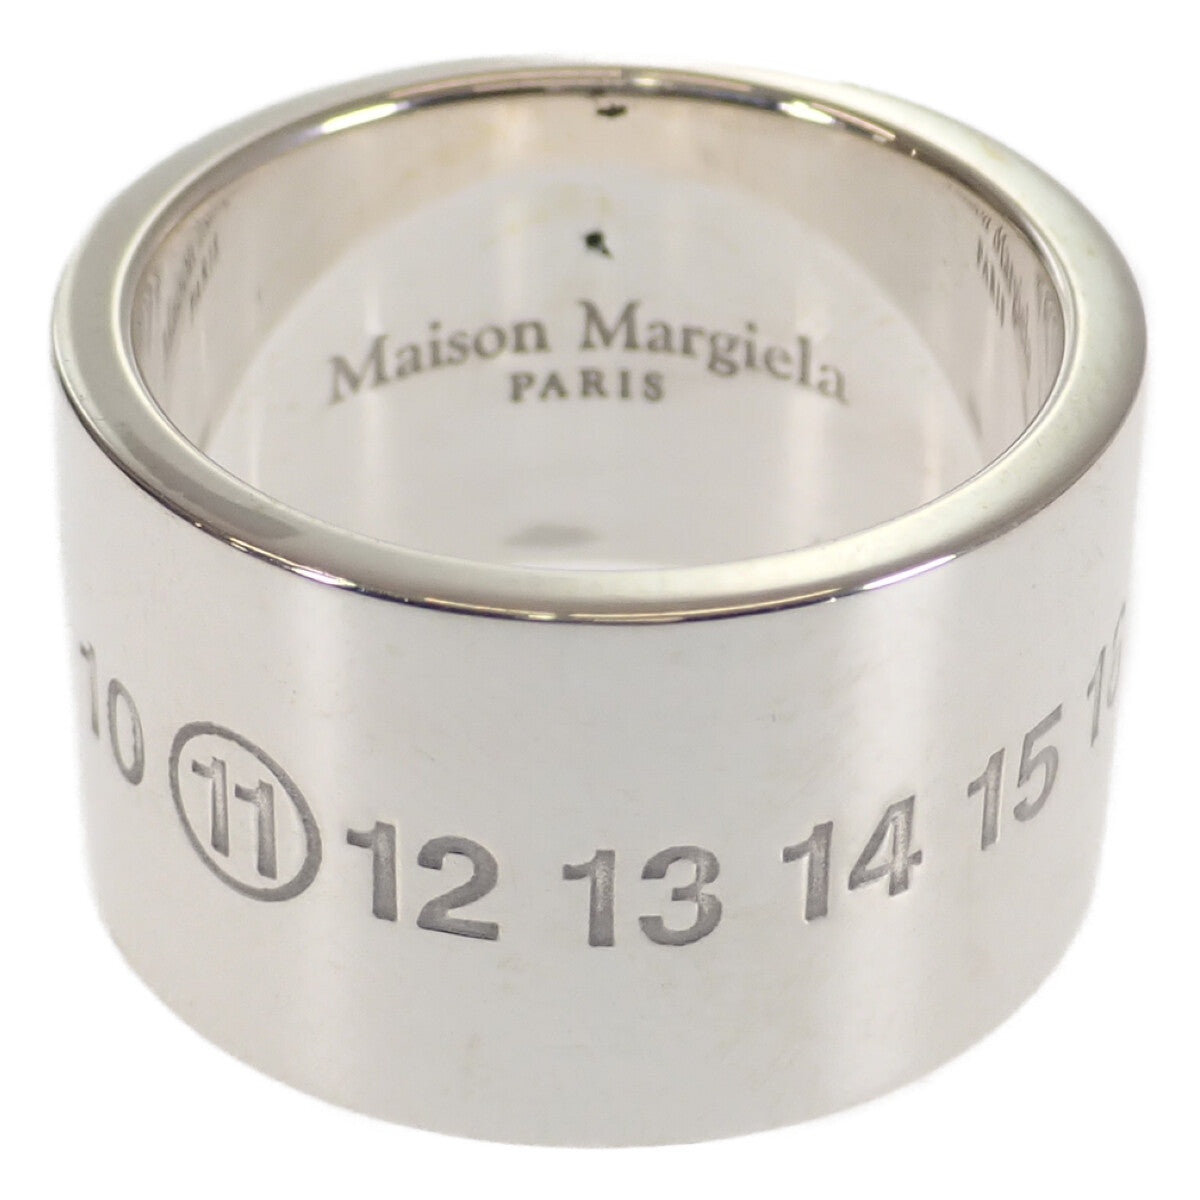 [LuxUness]  Maison Margiela Logo Number Ring in Silver 925, Unisex, Size 18 - 433873 in Excellent condition